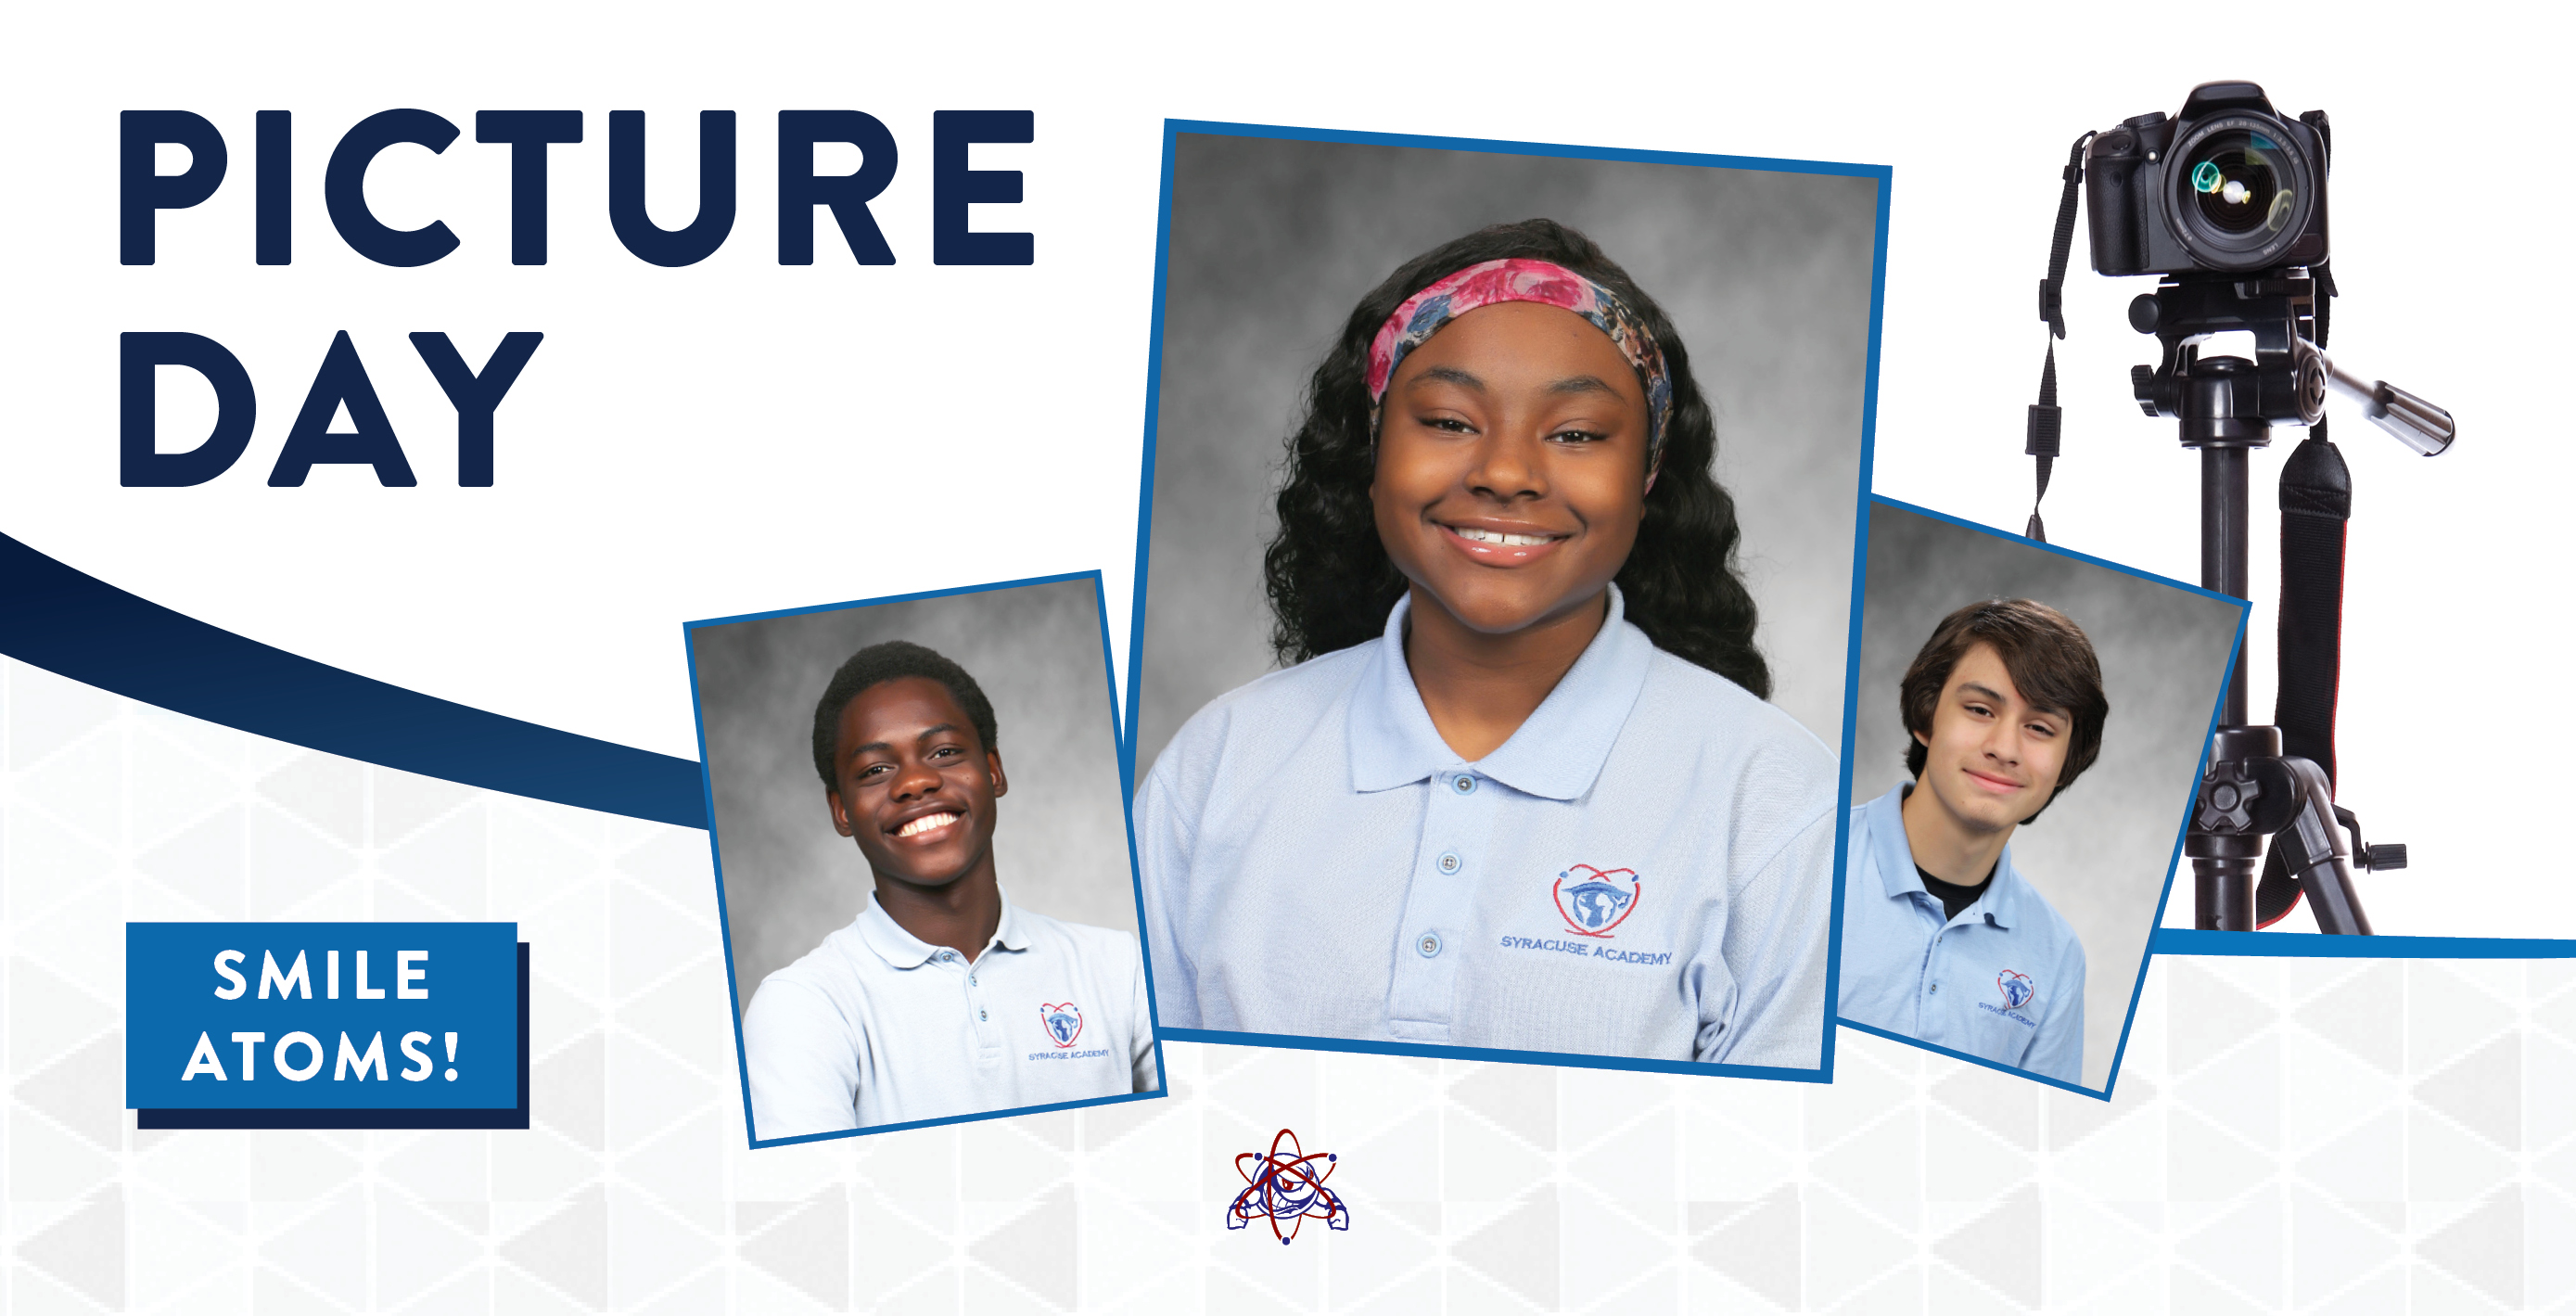 Smile, Atoms! Syracuse Academy of Science Middle & High School Announces Picture Day